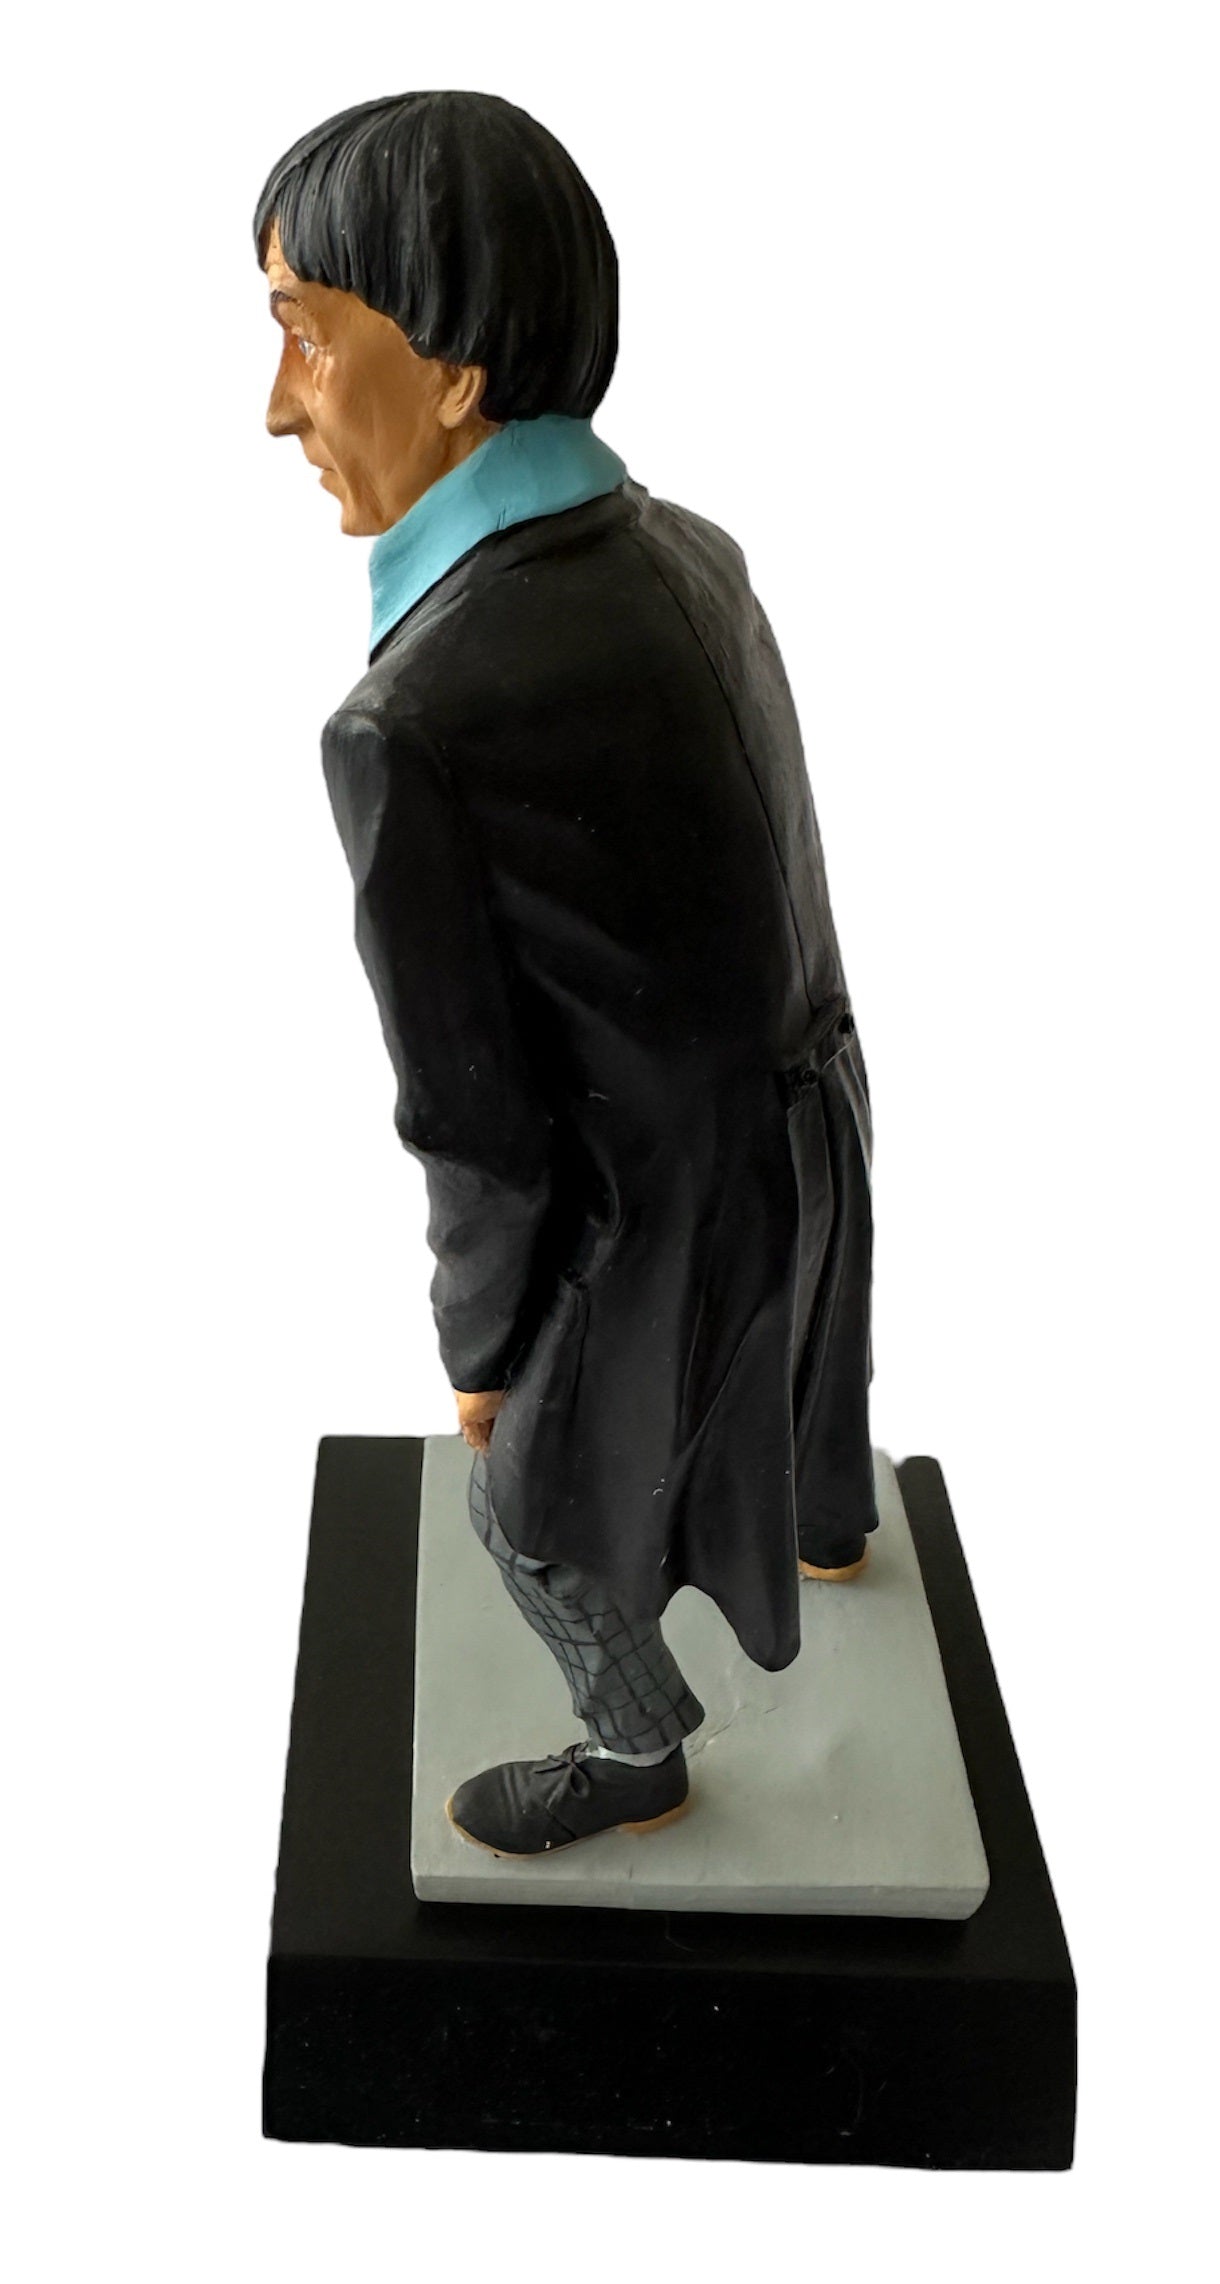 Dr Who The 2nd Doctor Patrick Troughton Classic Sheercast Hand Painted Limited Edition 8 Inch Figurine